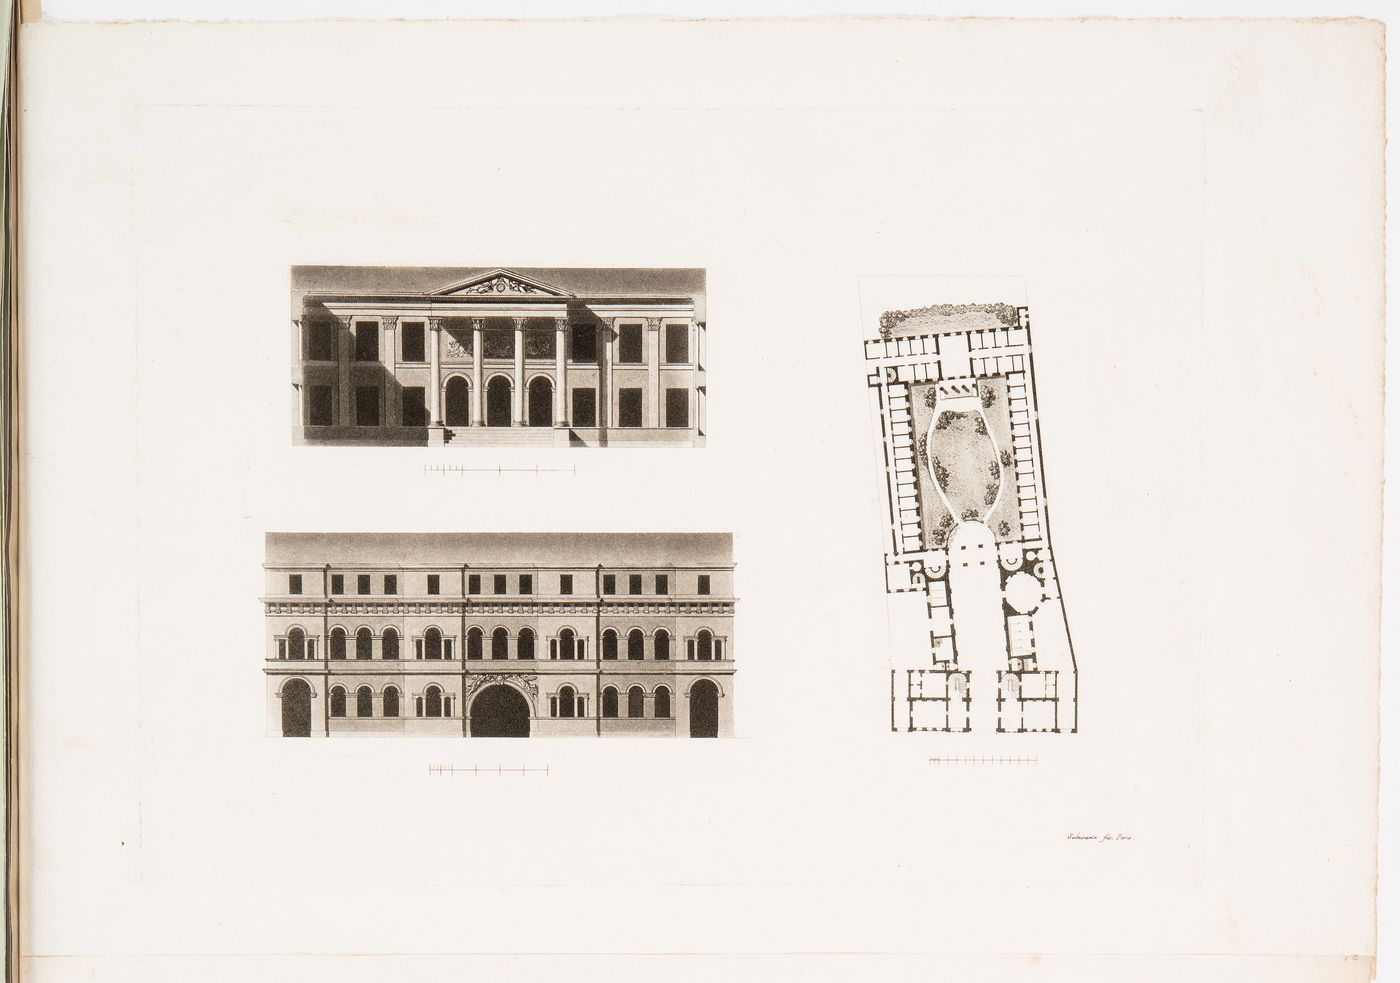 Elevations and plan for an unidentifed building, perhaps an hôtel